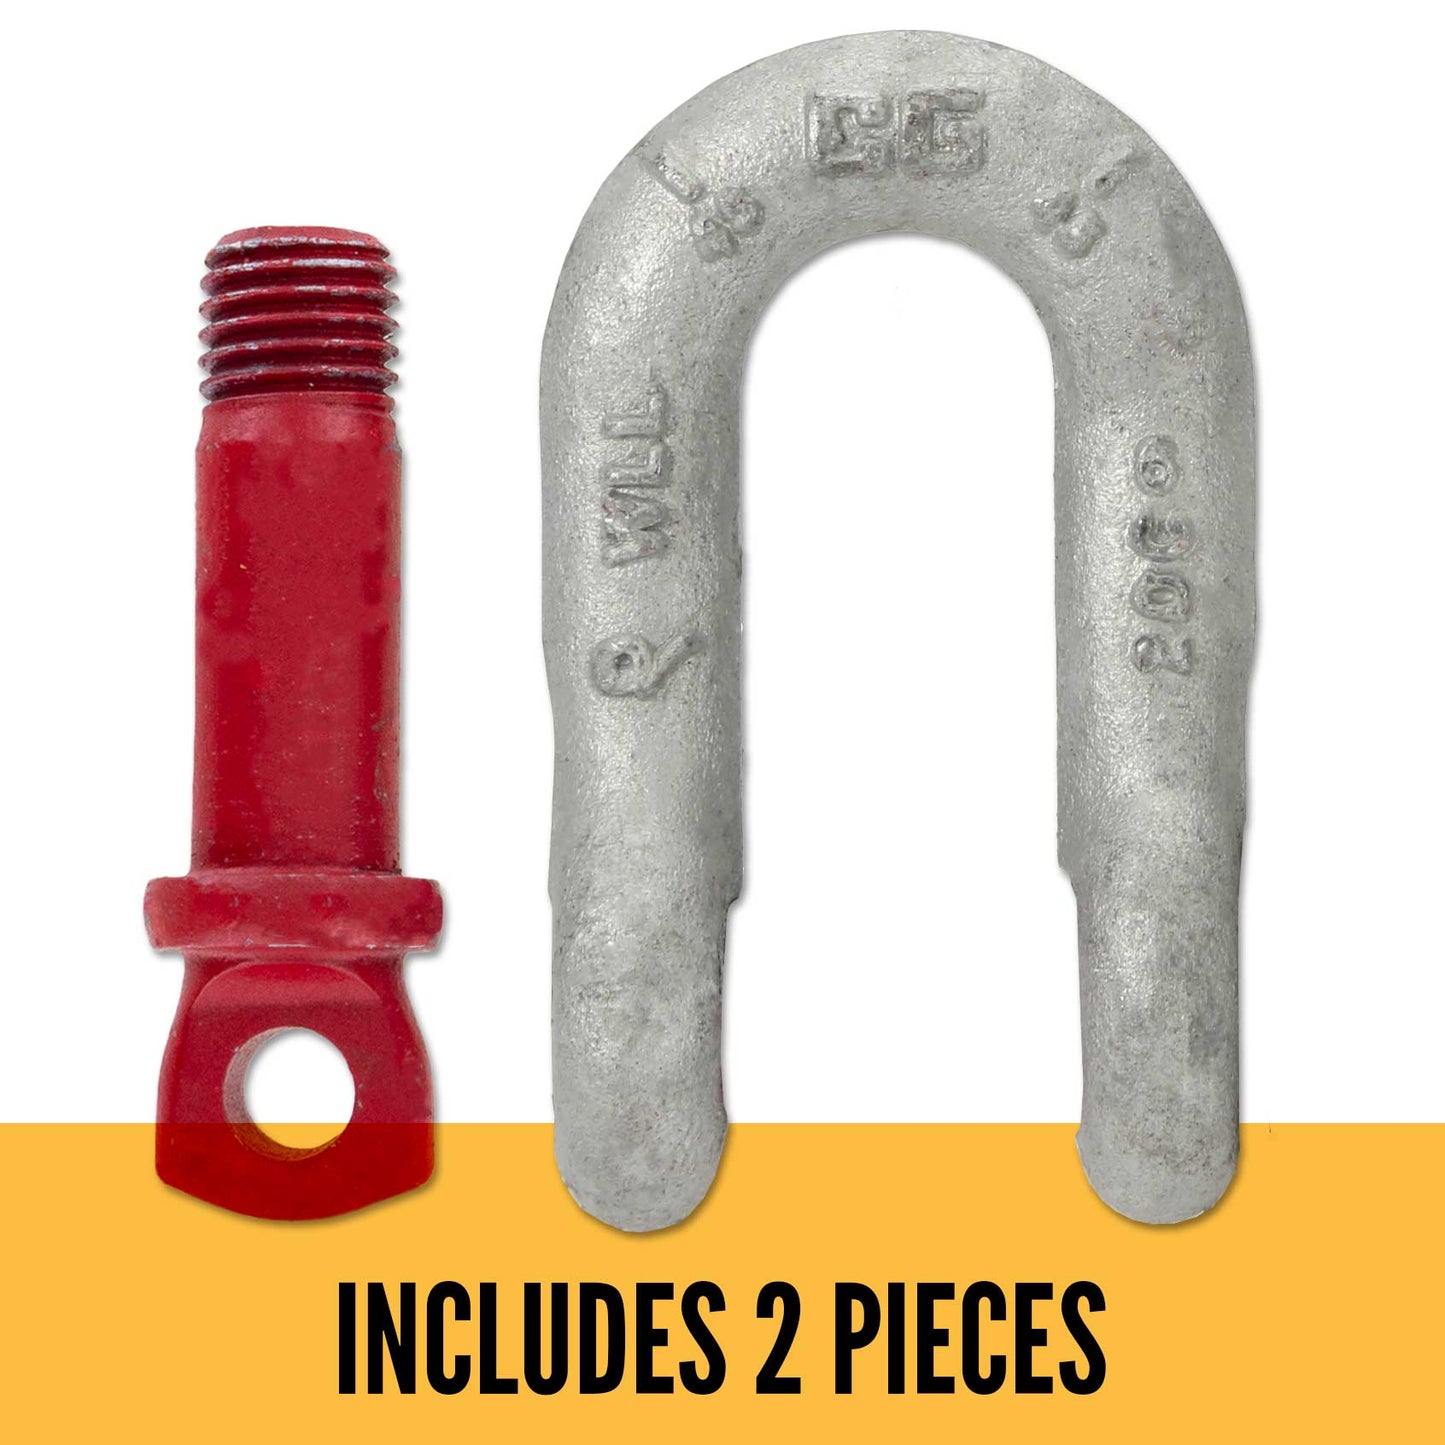 7/8" Crosby® Screw Pin Chain Shackle | G-210 - 6.5 Ton parts of a shackle